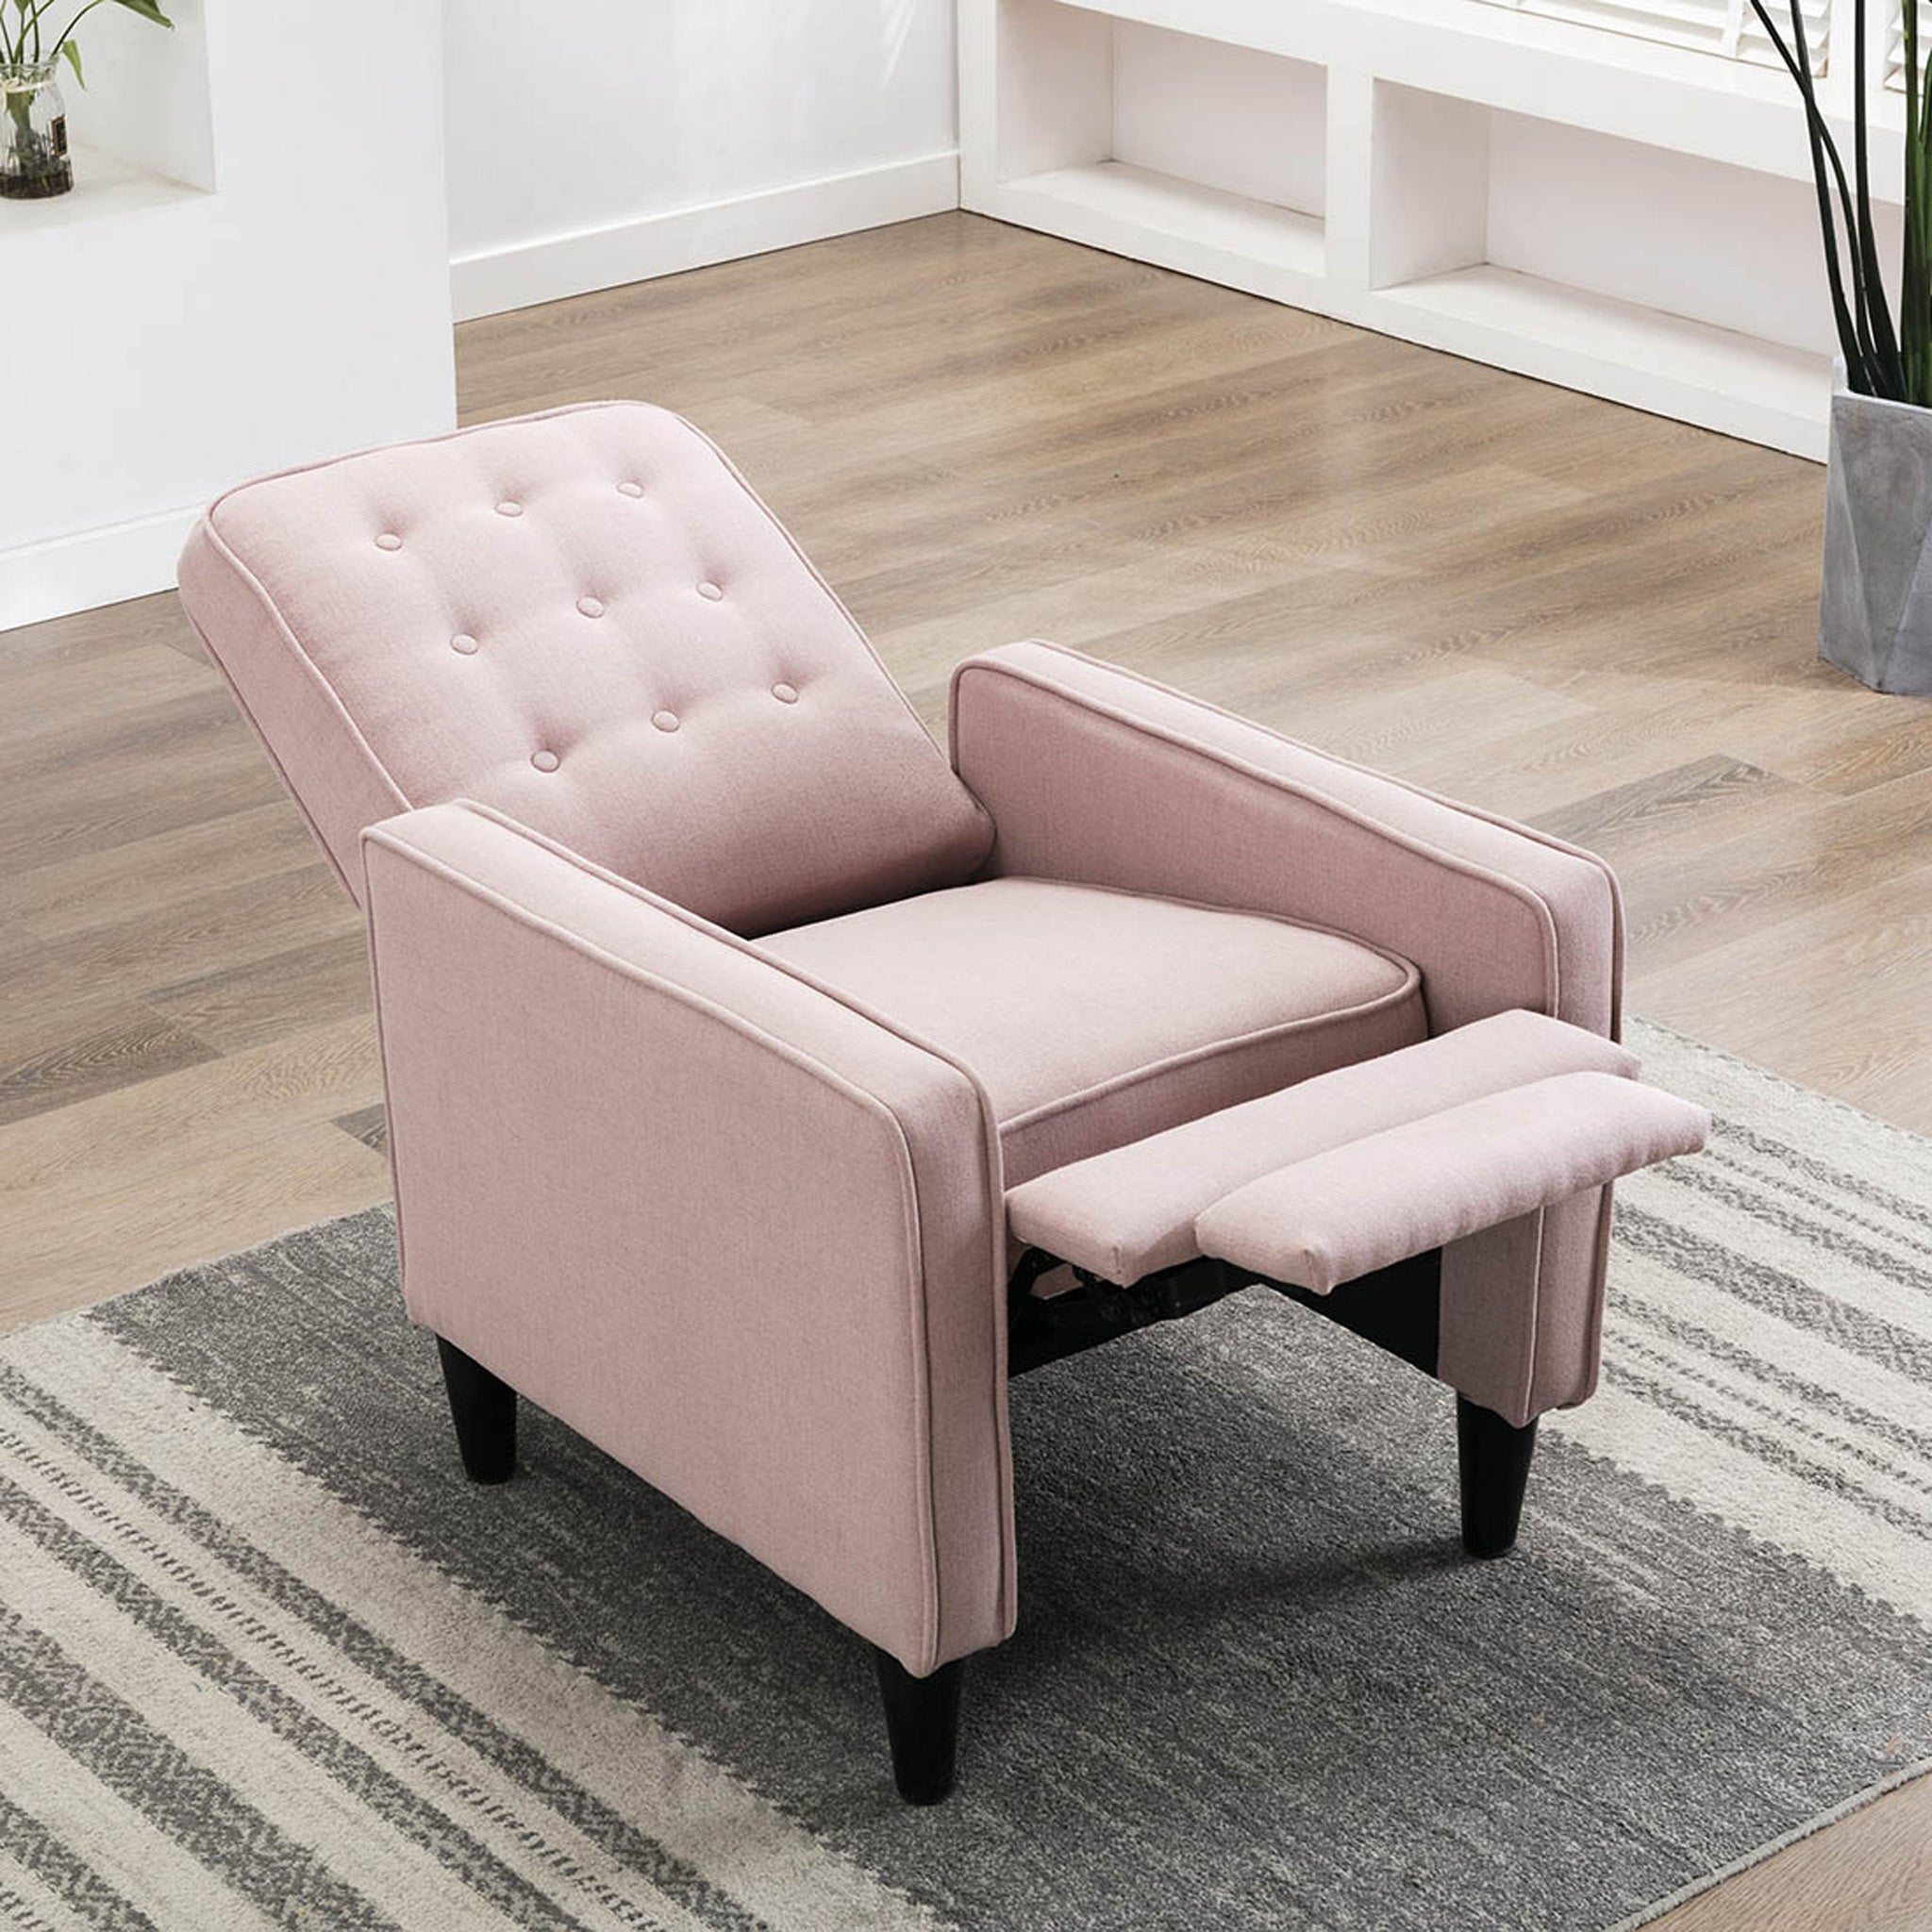 6 Reasons Why We Love The Kenilworth Recliner – Furniture Online